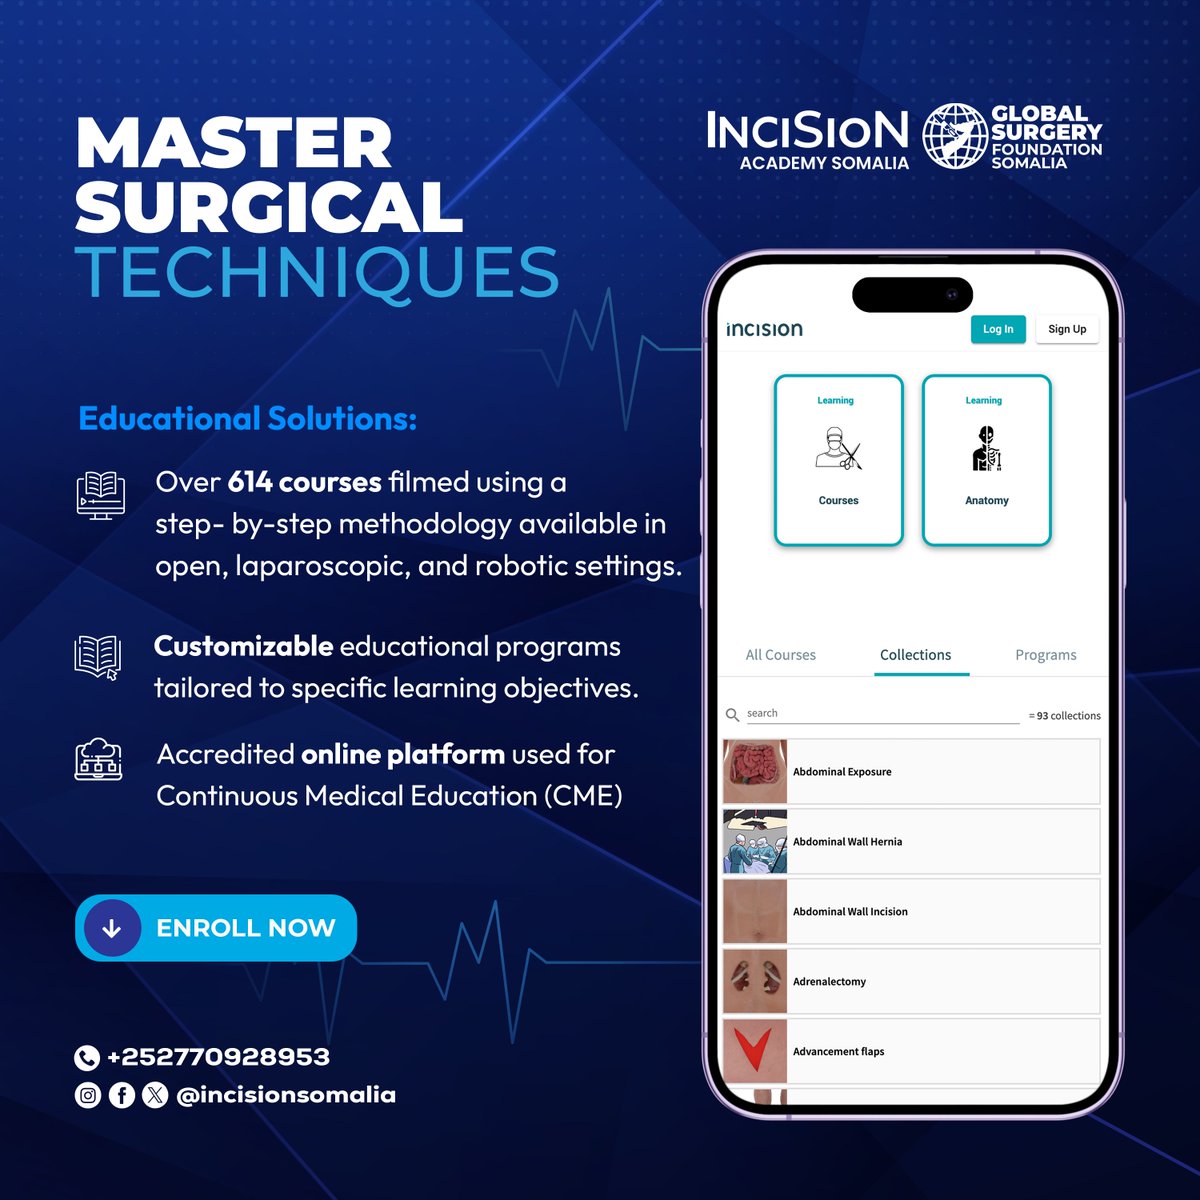 💉 Transform Your Surgical Skills Today!

Join the revolution in surgical education with Incision Somalia. Over 614 courses designed to enhance your expertise. 📞 Call us now at +252770928953 to enroll and elevate your surgical career.

#incisionAcademy #InciSionSomalia